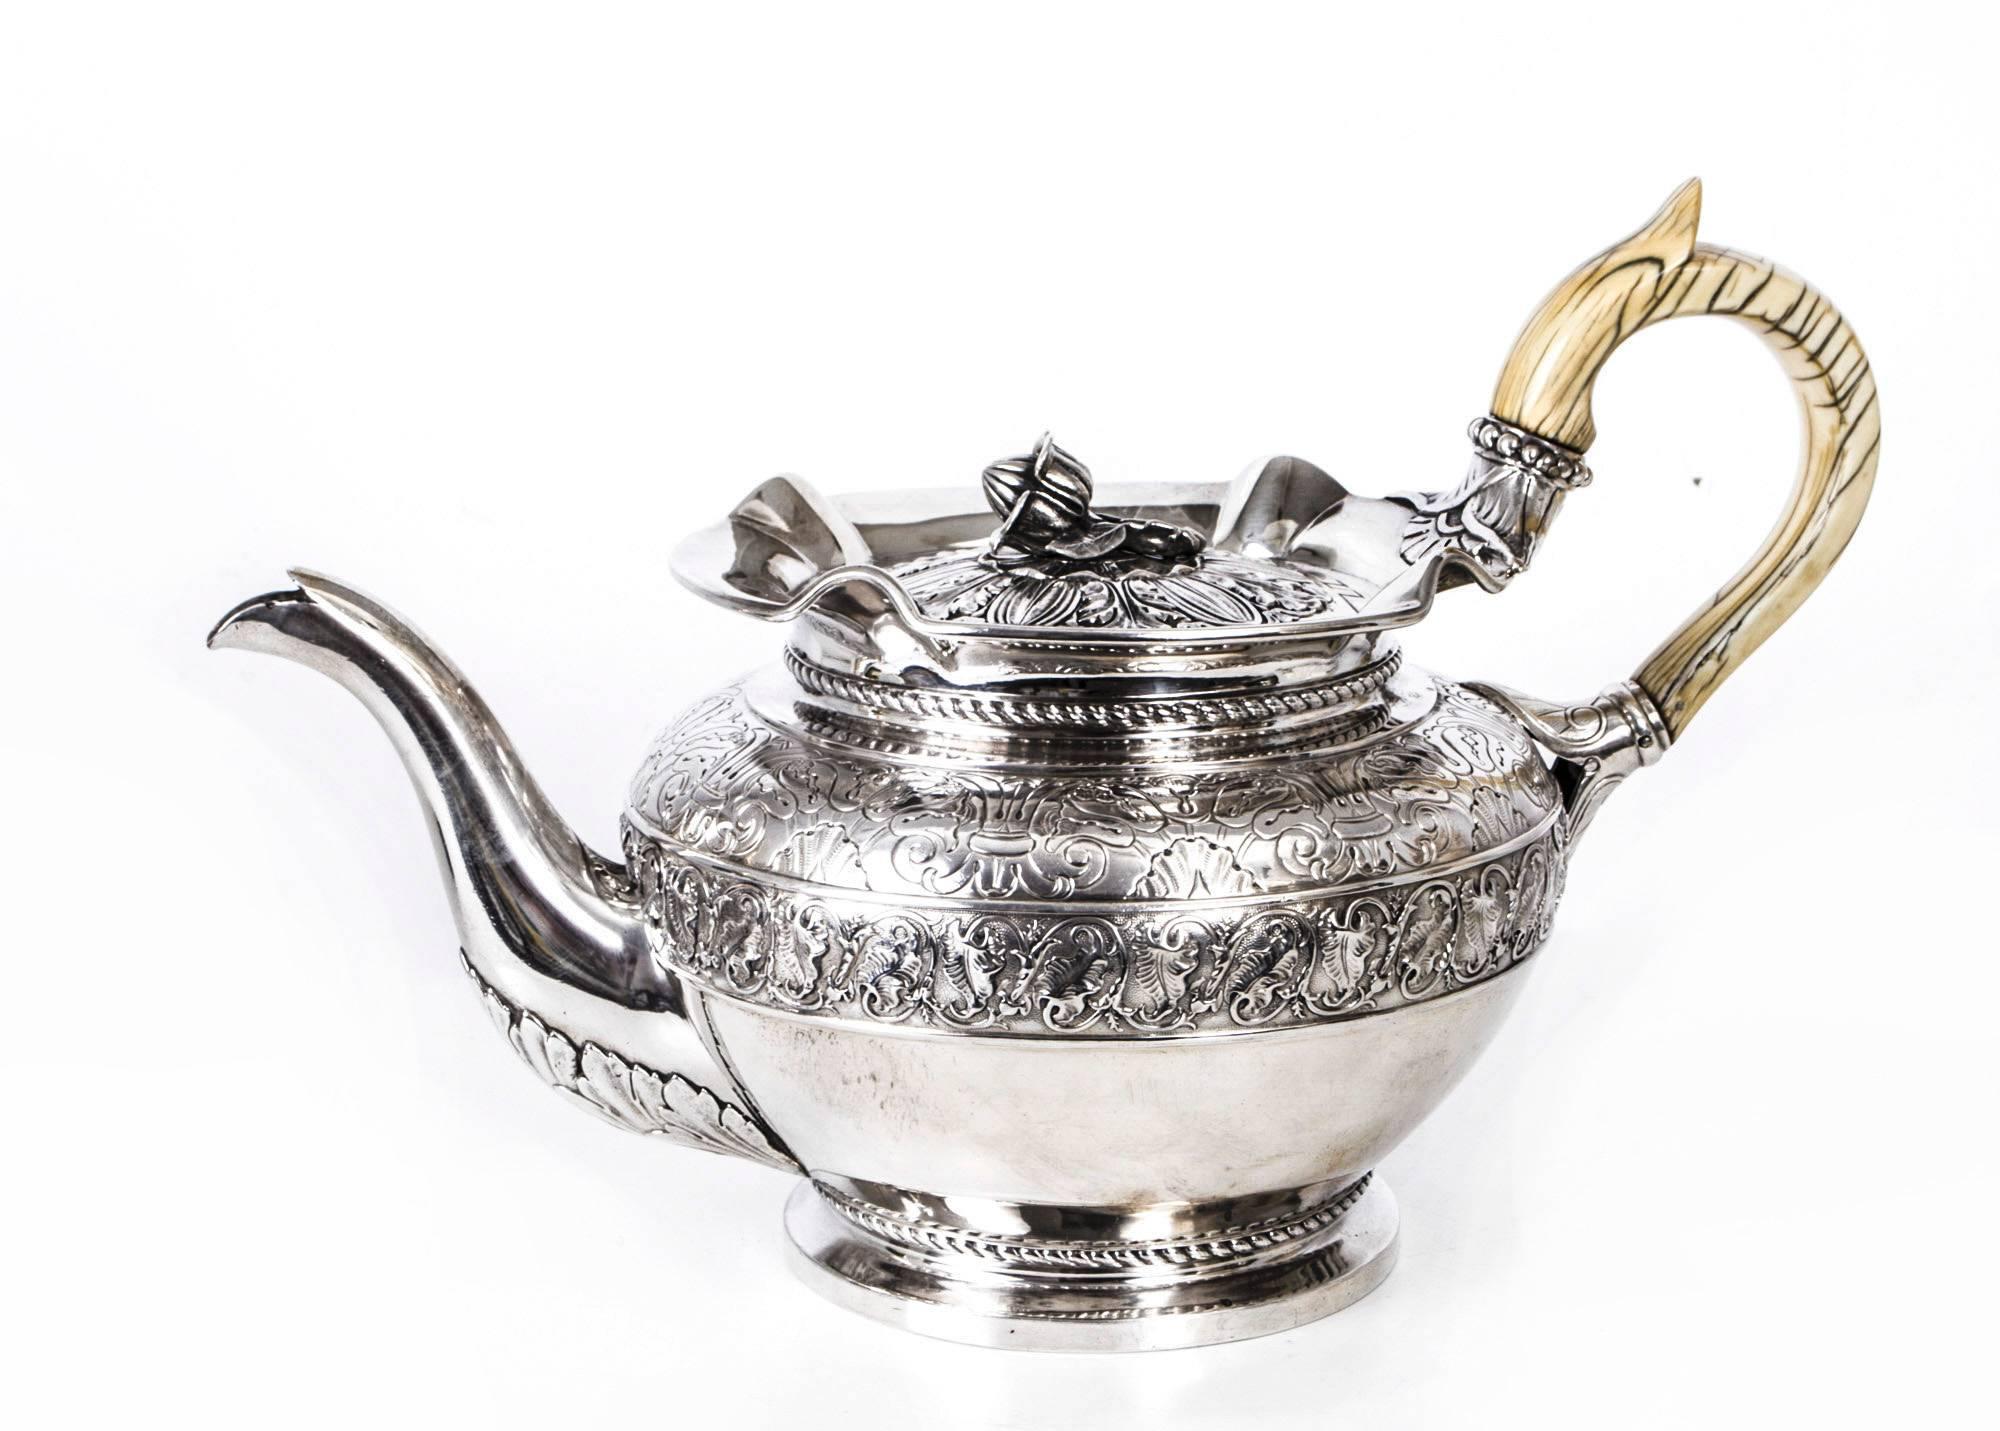 This is a really superb antique sterling silver teapot with hallmarks for London 1825 and the makers mark of one of the most celebrated silversmiths of all time, John Bridge.

With chased and engraved classical foliate decoration typical of his